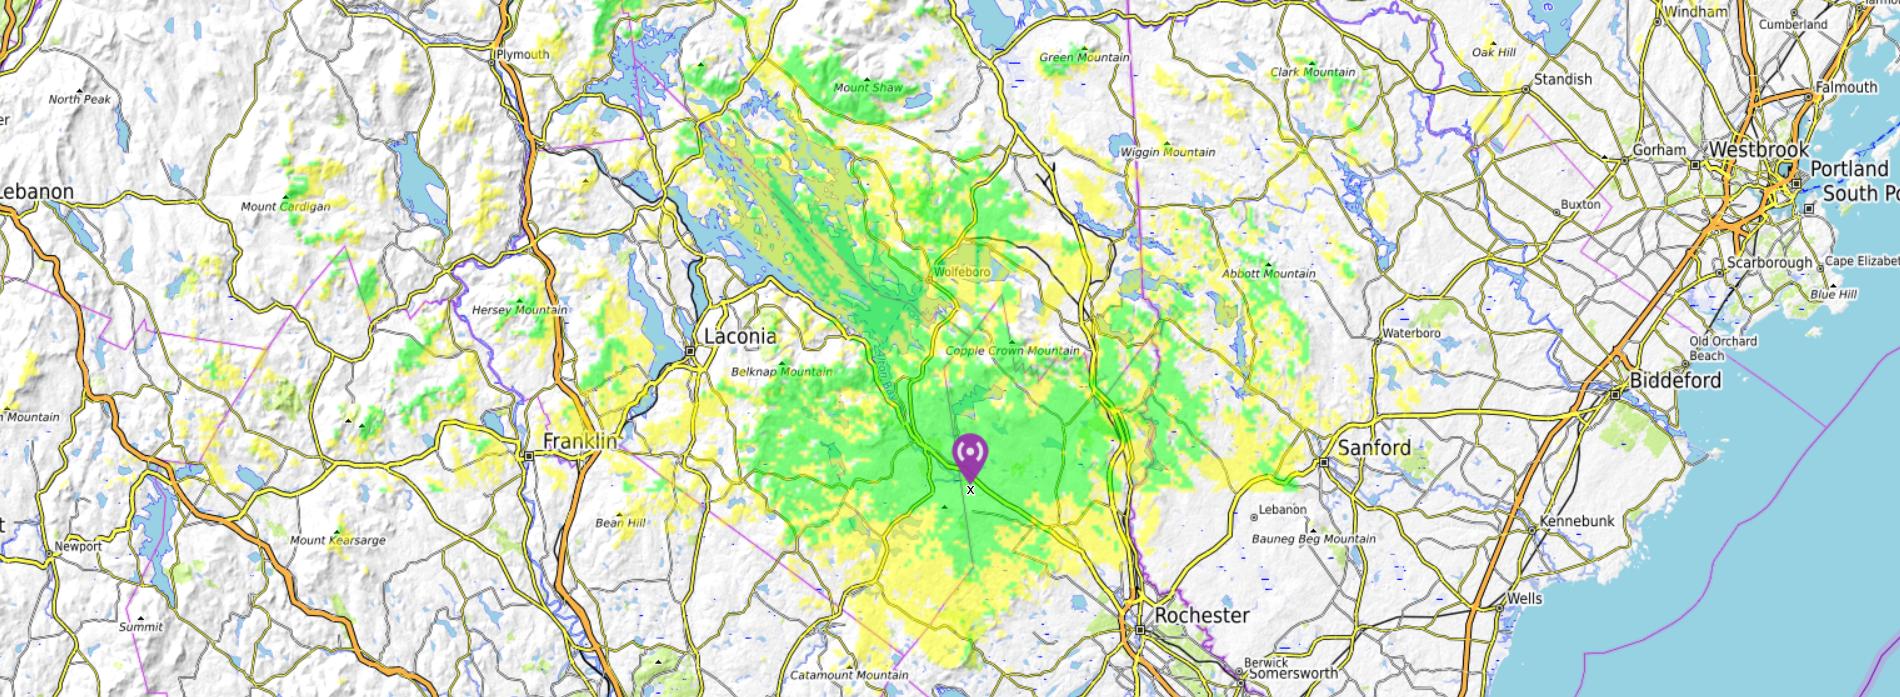 444.750 mhz rf coverage map